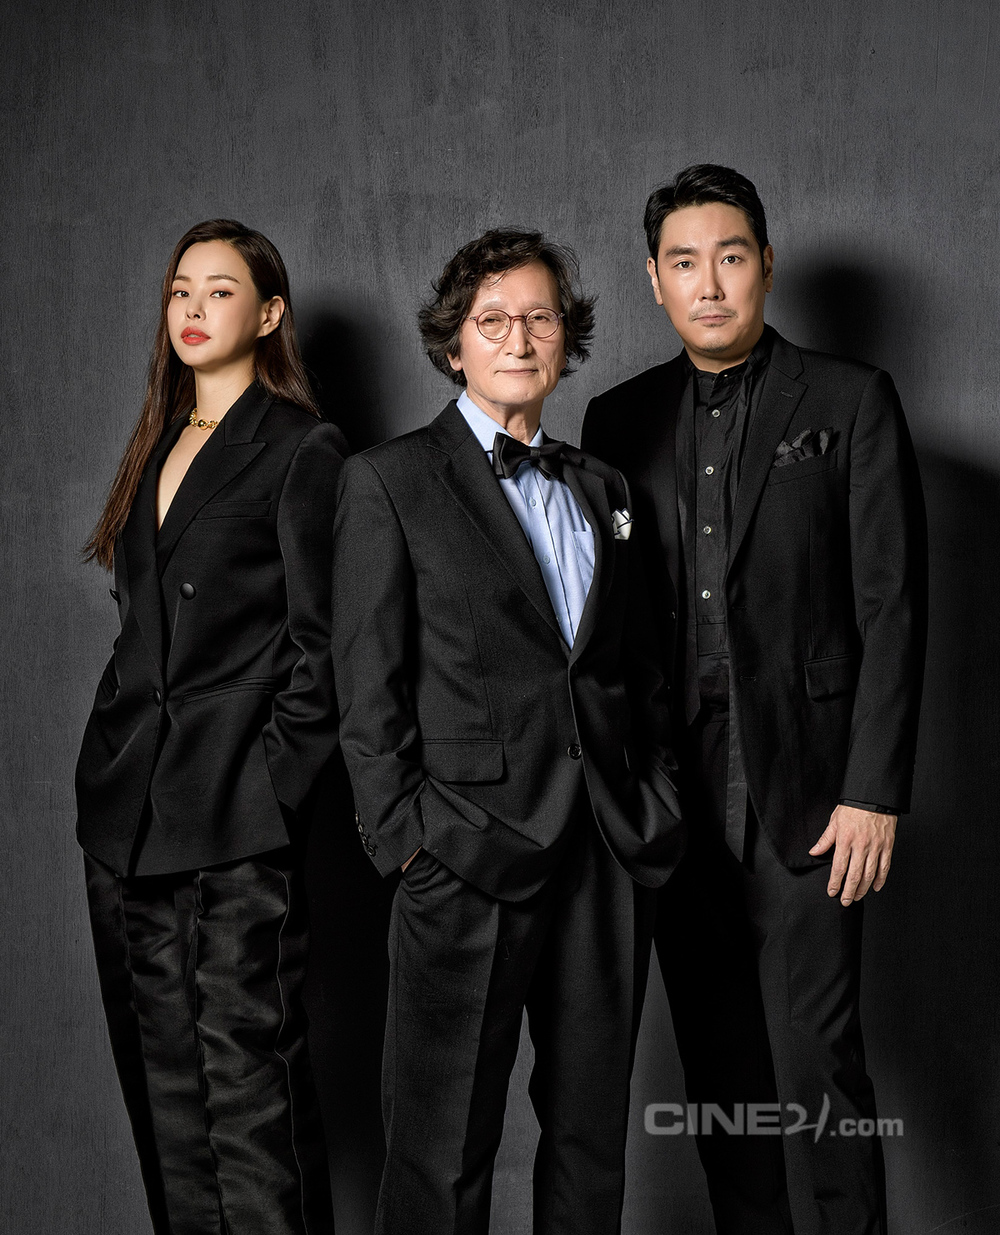 Black Money Cho Jin-woong, Lee Ha-nui and Jin Ji-yong director released a charming picture through the movie magazine Cine 21.The film Black Money (director Jeong Ji-yeong) is a true story about a financial crime that tells the story of a prosecutor Yang Min-hyuk, who is just going to go for Susa, who is in trouble because of the suicide of the suspect he was in charge of investigation,Cho Jin-woong, who performed a hot test with Yang Min-hyuk, looks forward to his performance in the movie, with his sharp eyes staring at the front and exhaling intense charisma.Lee Ha-nui shows off his unique confident charm and gives a glimpse of the cold lawyer Kim Na-ri, who cooperates with Yang Min-hyuk and the enemy.After the movie Broken Arrow, the heavy topic and the heavy figure of director Jeong Ji-yeong, who returned to the interesting true story film, can confirm the Korean movie industrys leading force.pear hyo-ju